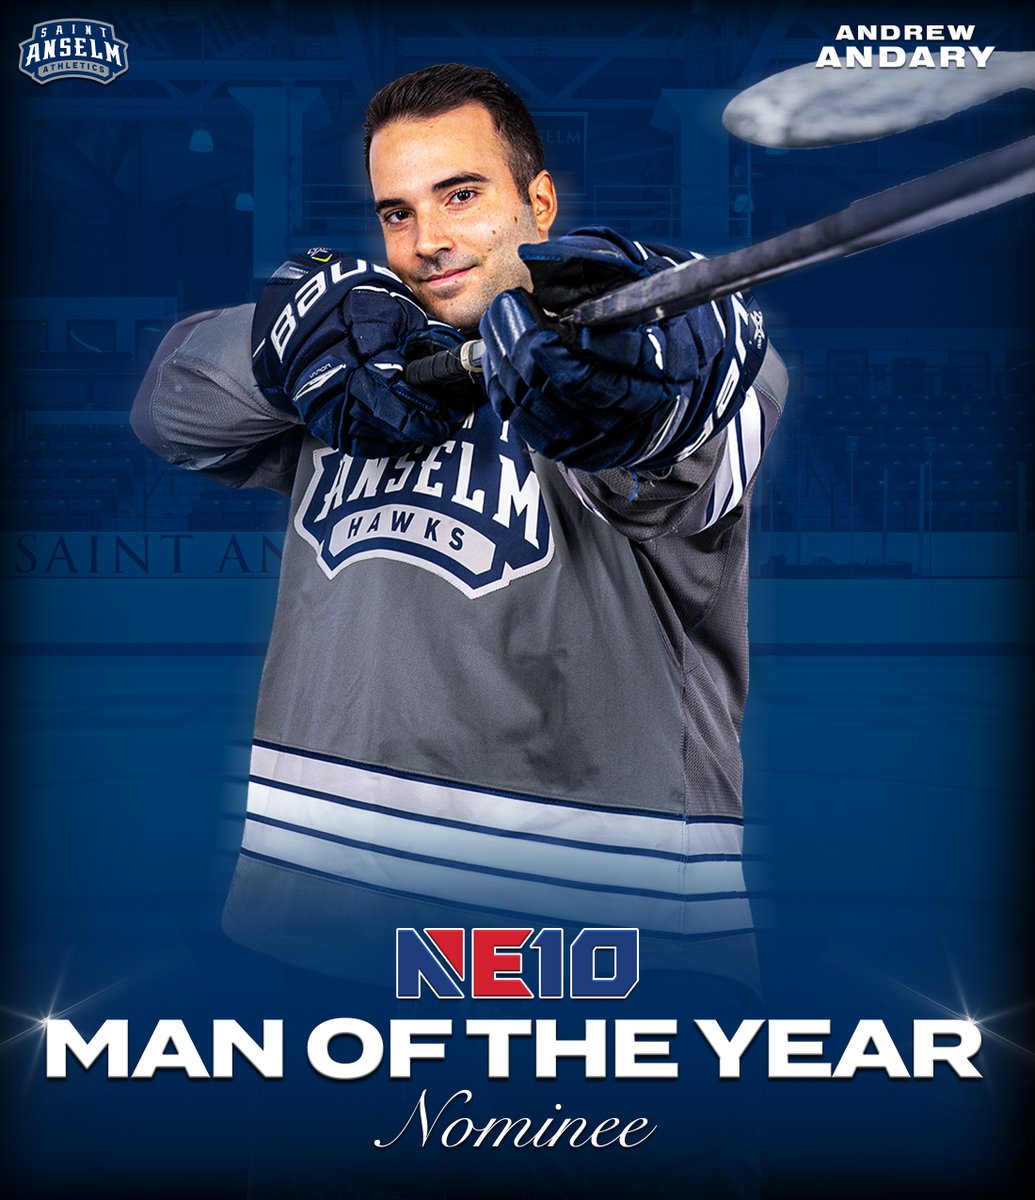 Congratulations to senior Andrew Andary on being nominated for the NE10 Man of the Year Award!

#HawksSoarHigher